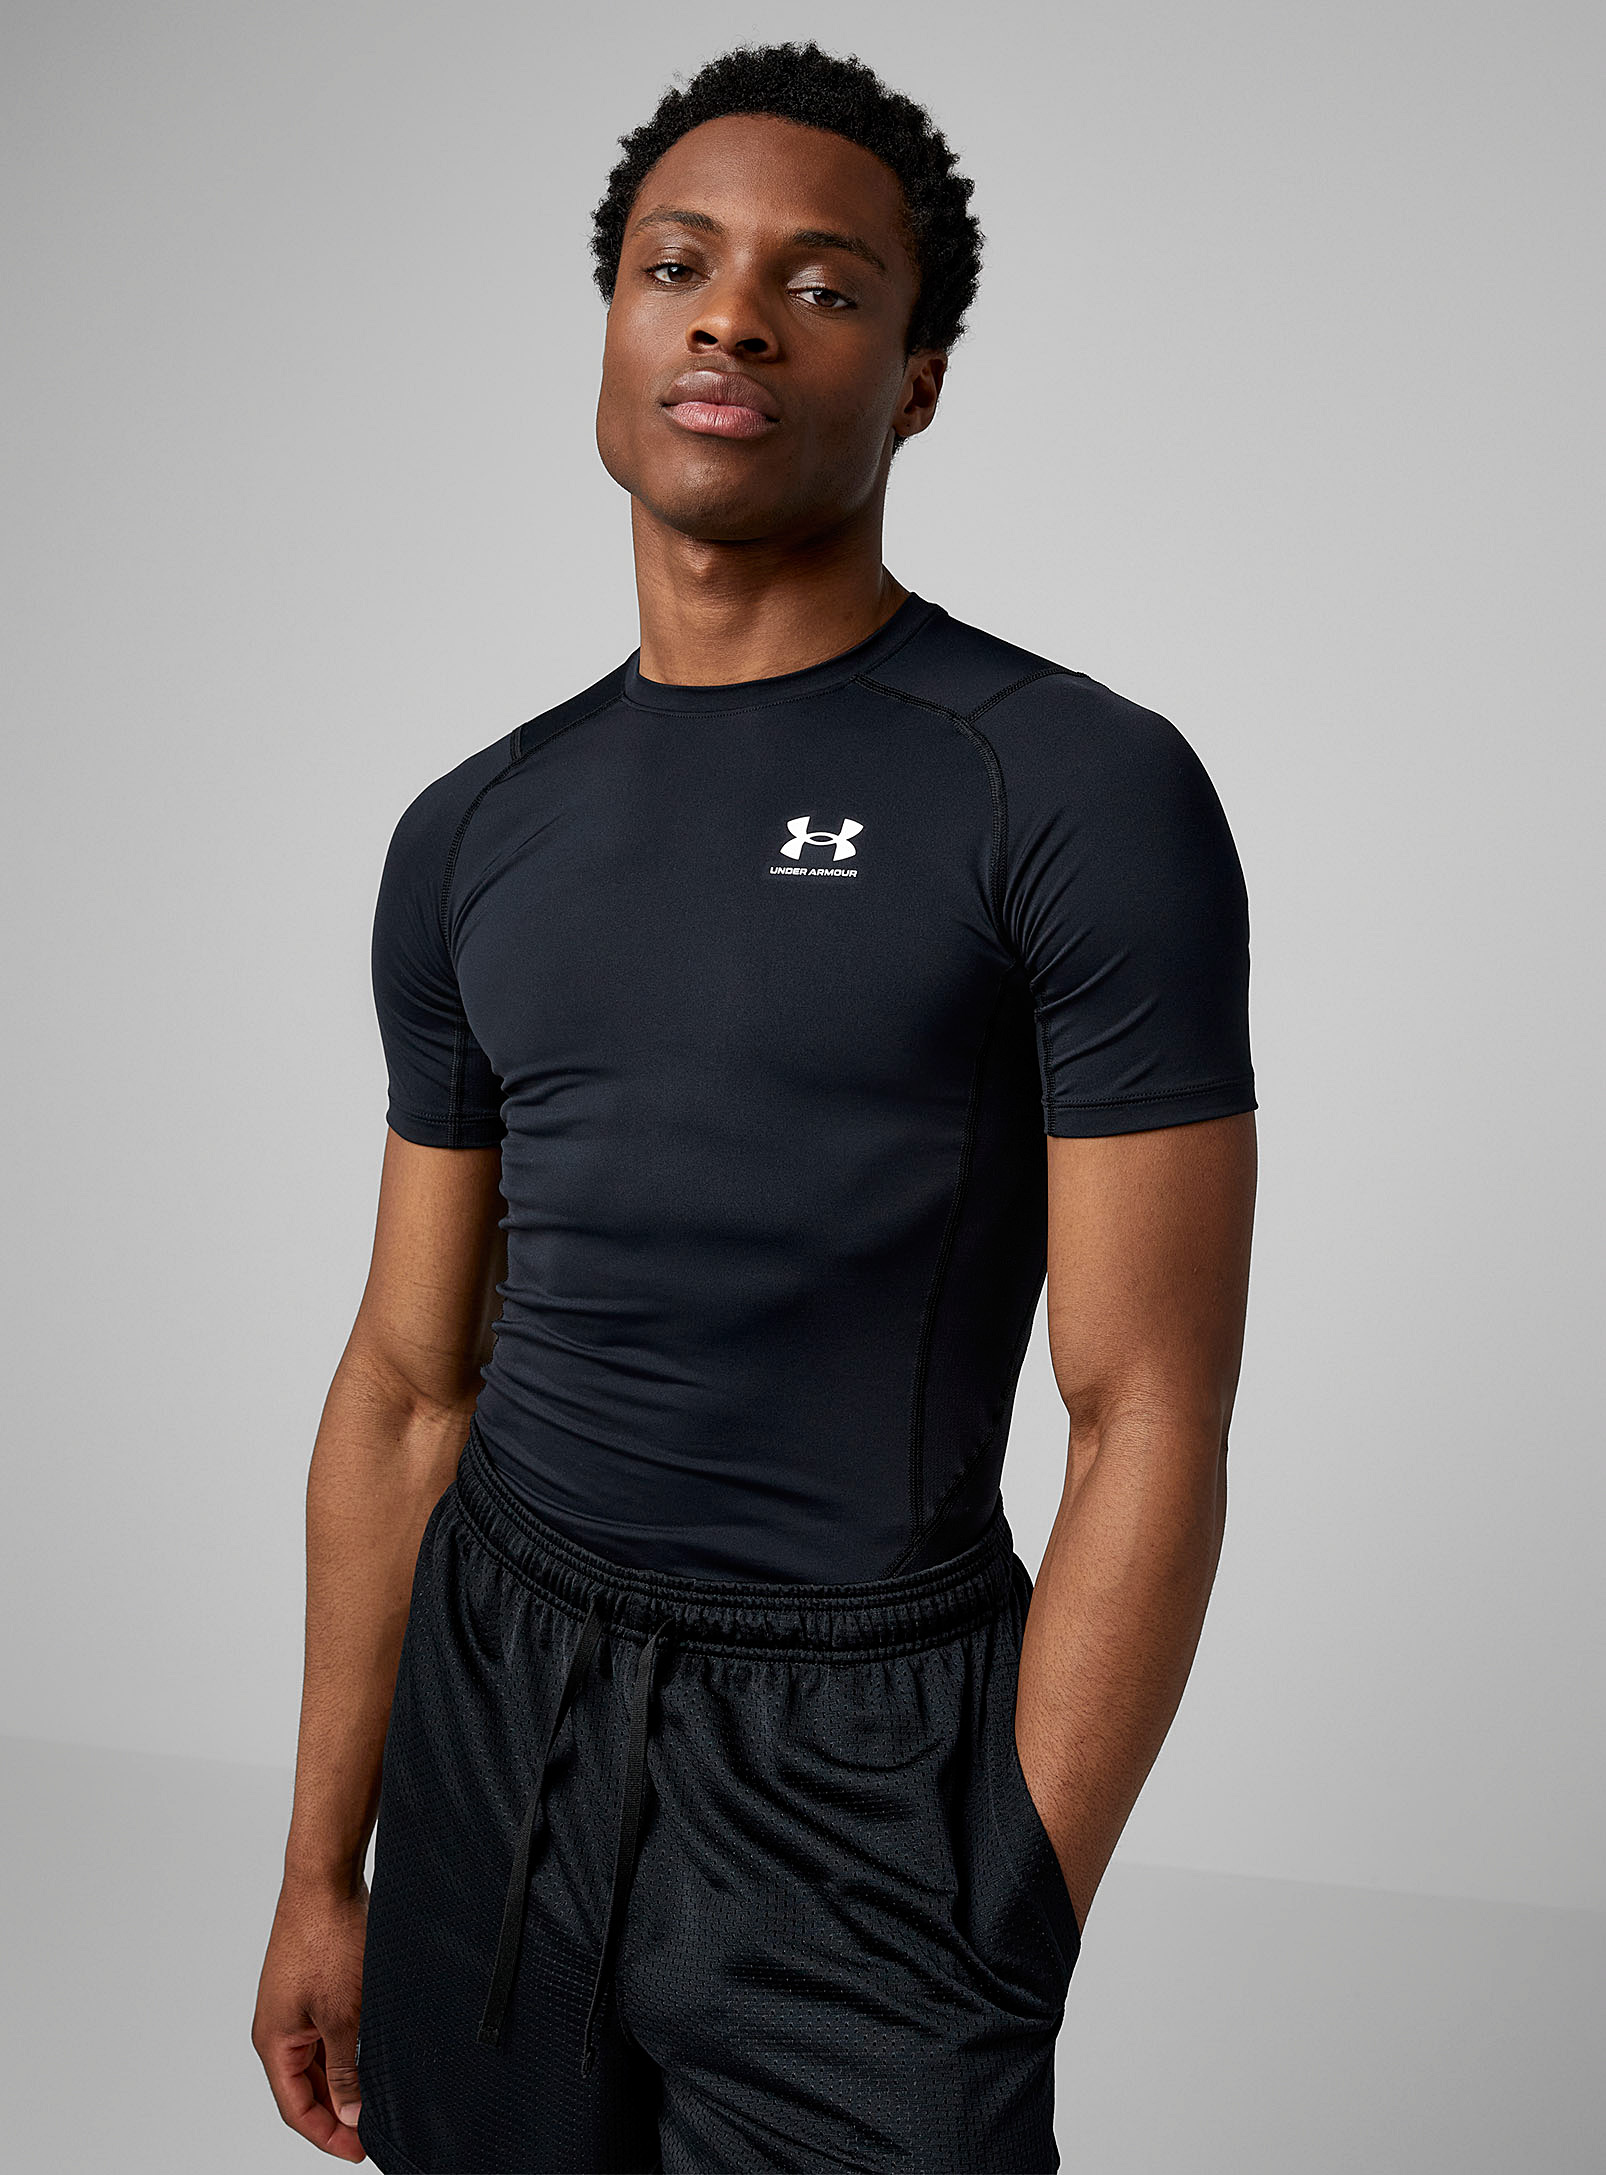 Under Armour - Men's Flat-seam fitted Tee Shirt